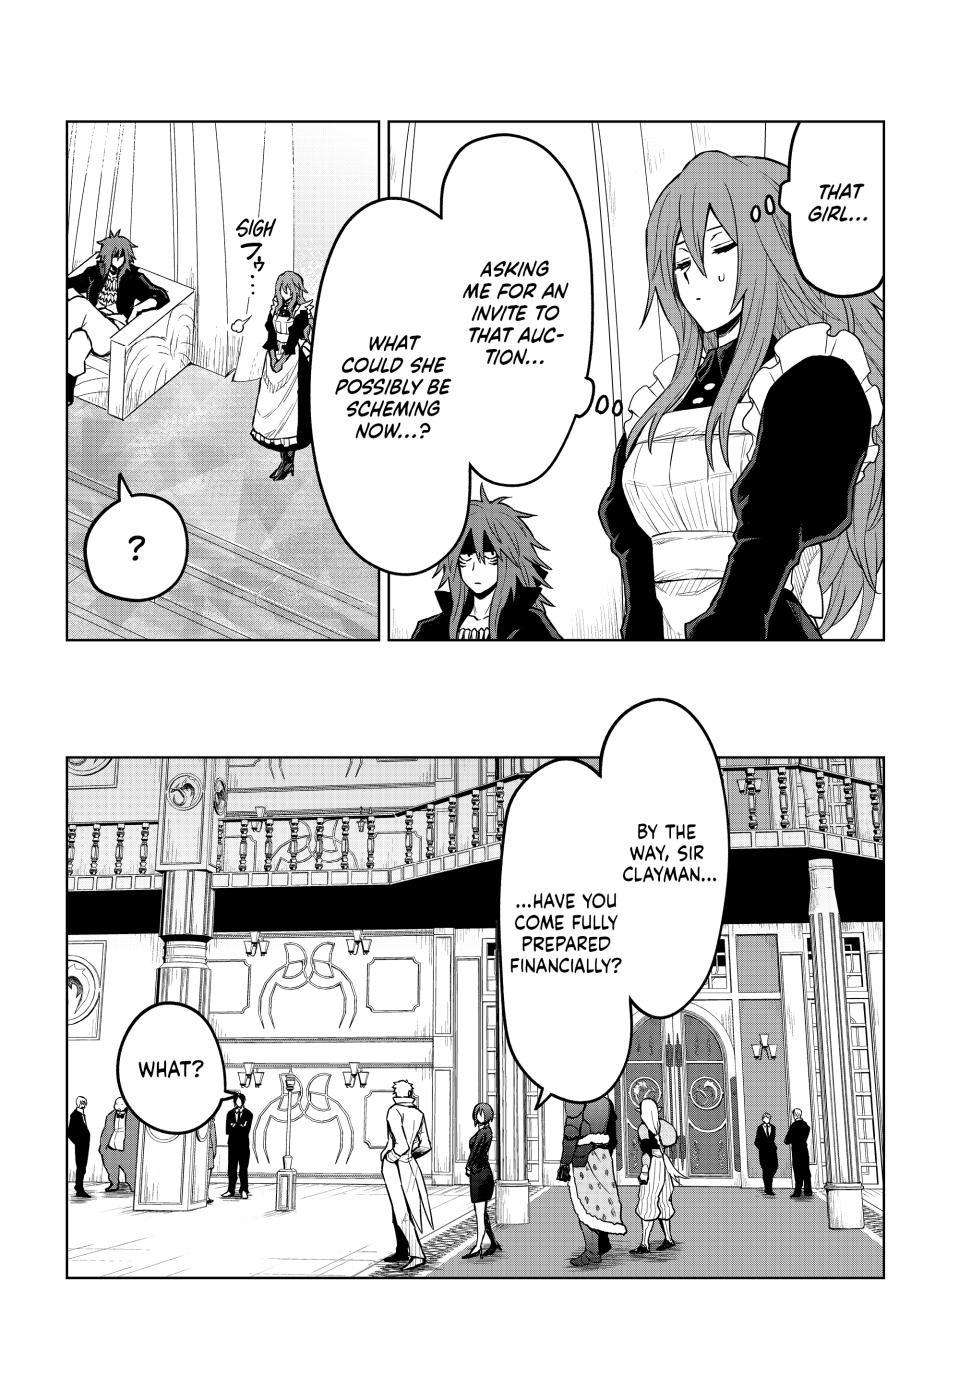 That Time I Got Reincarnated as a Slime - Clayman - chapter 20 - #5